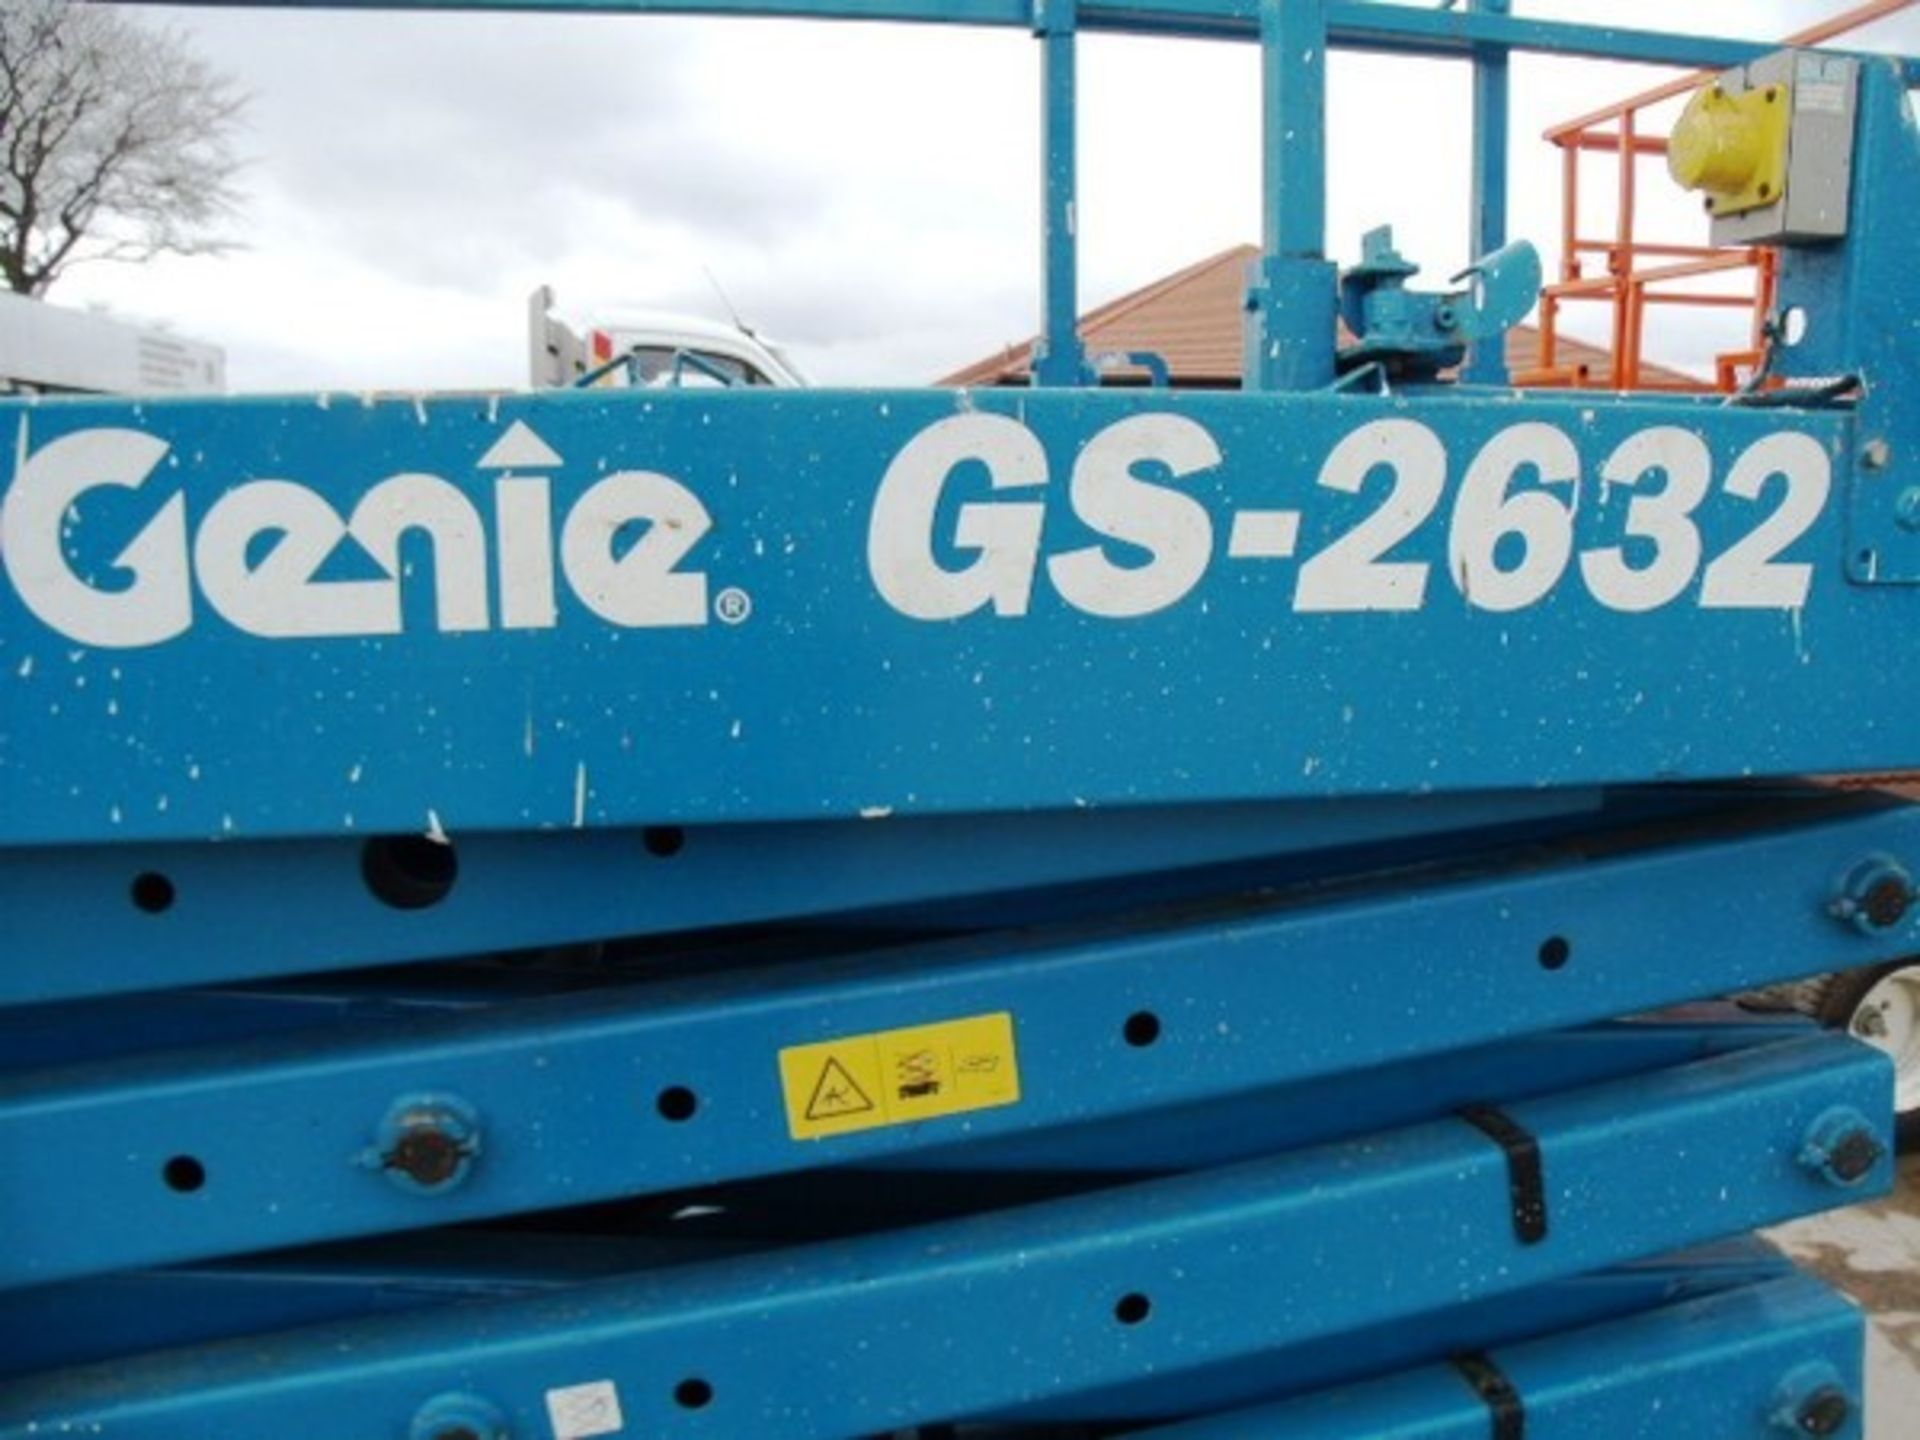 2007 GENIE 2632, s/n - GS3207/86954, 171hrs (verifed), new battery fitted Aug 2017. - Image 8 of 9